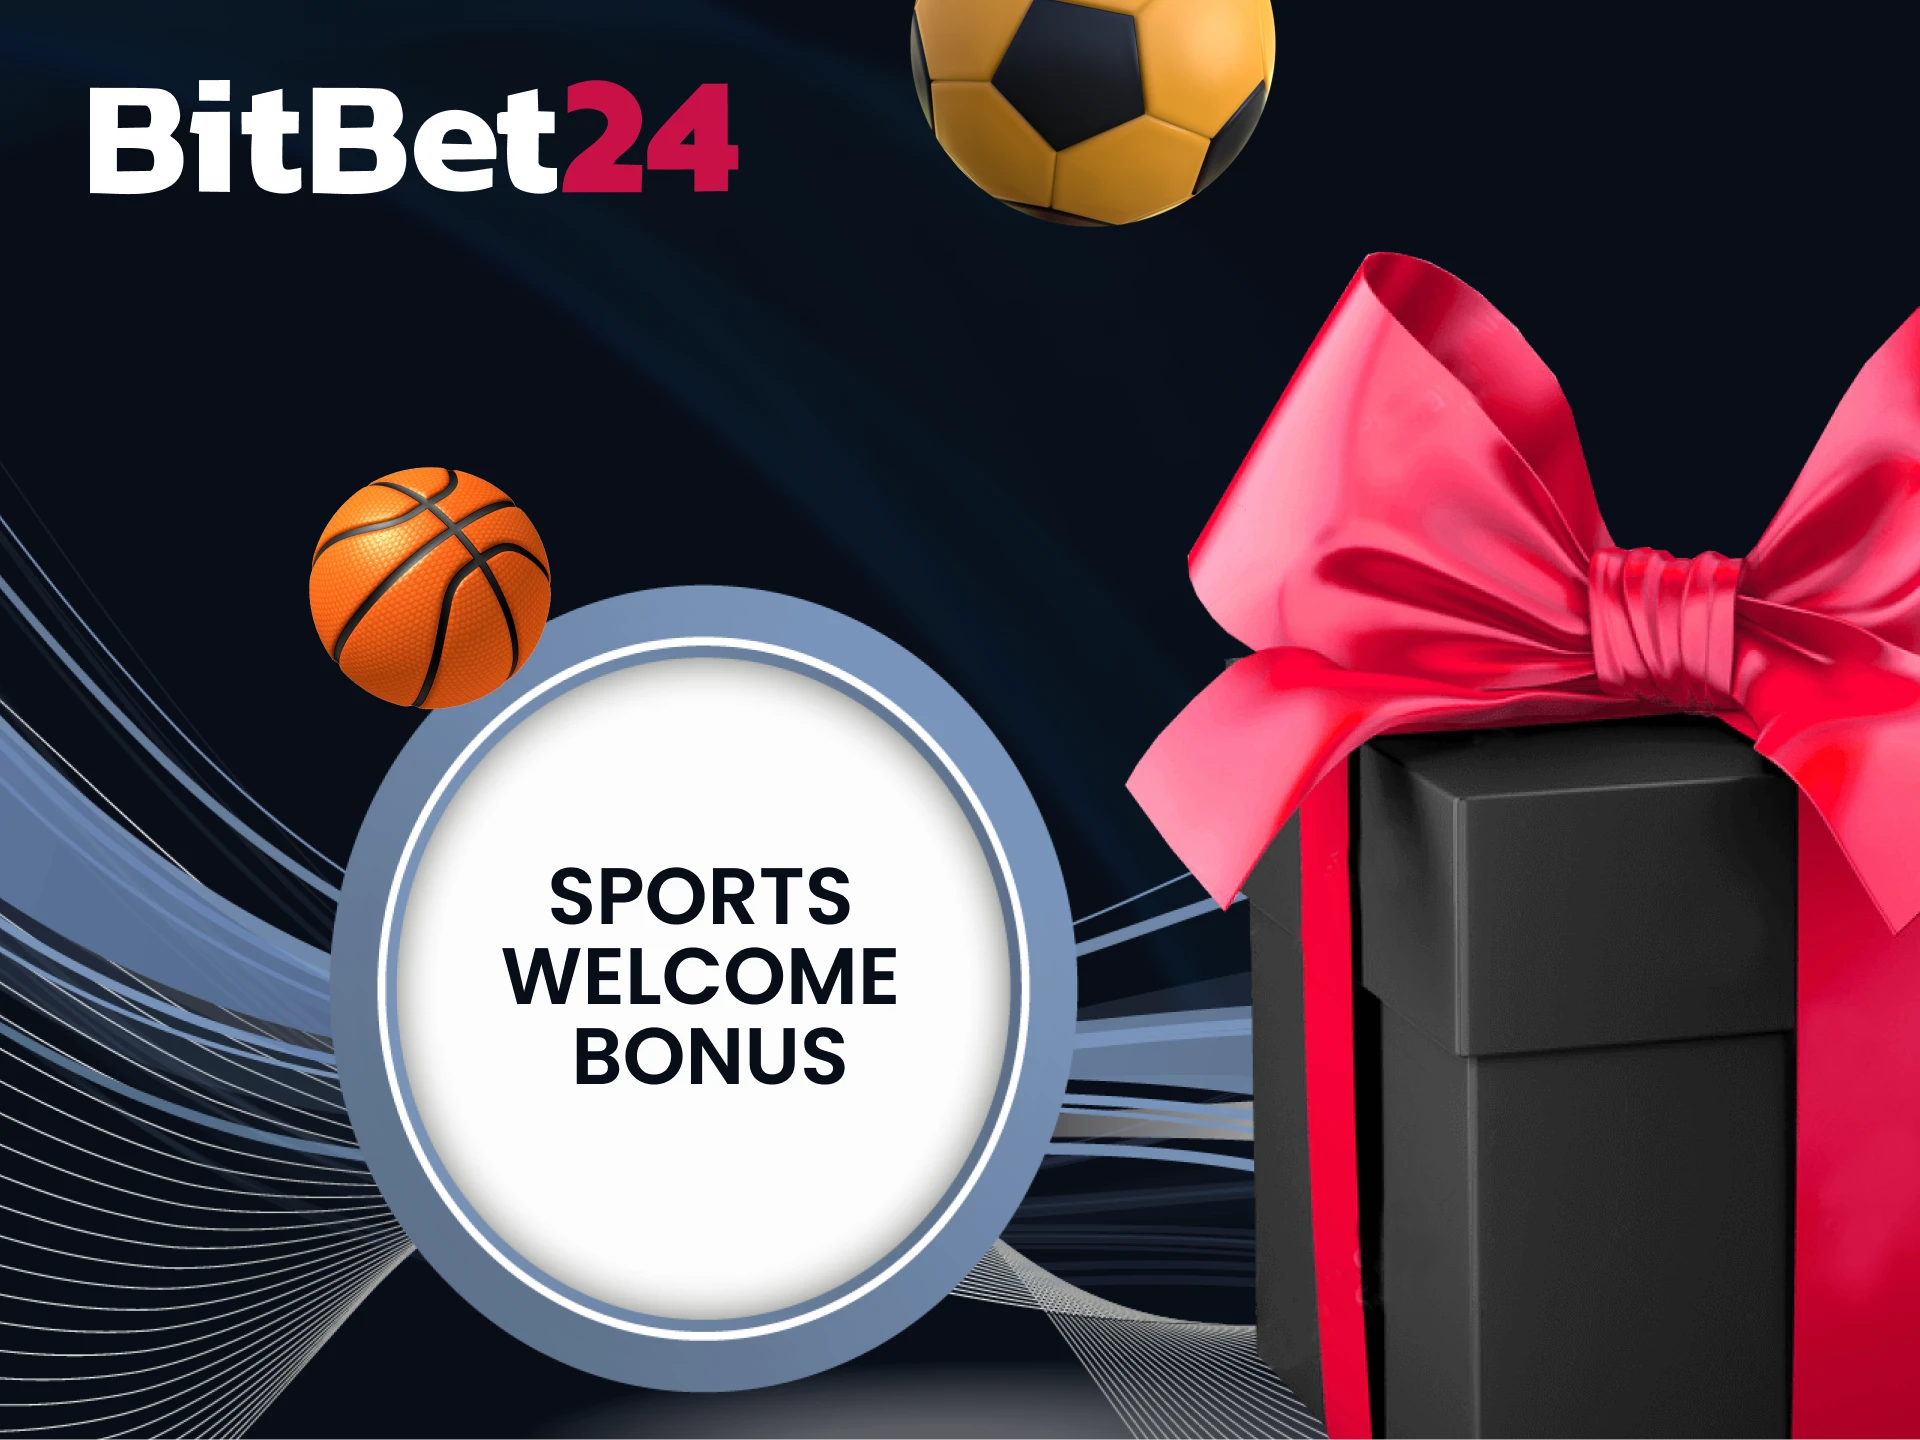 With BitBet24 get the best bonus for sports betting.